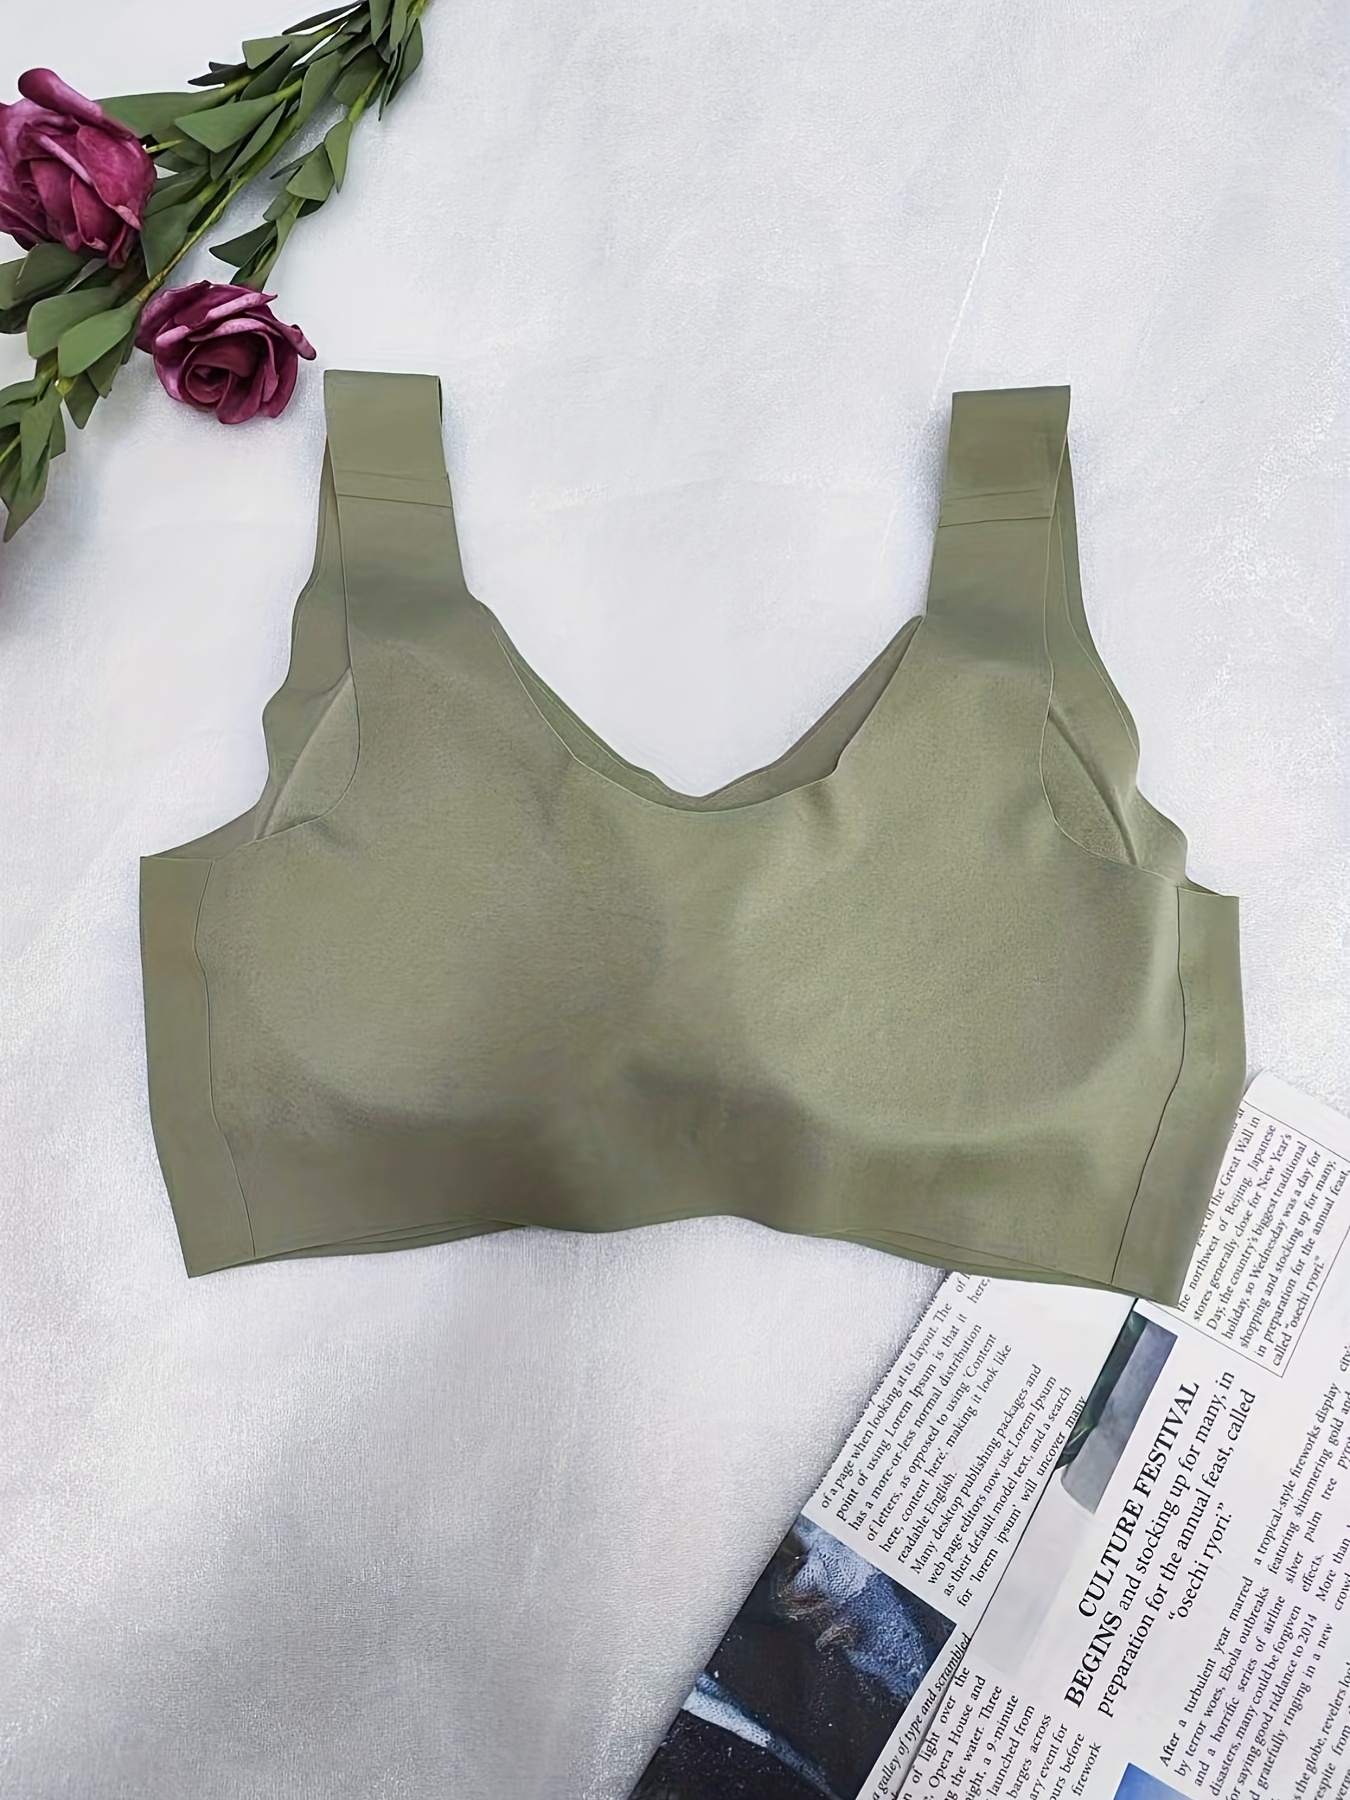 shoppers say this seamless wireless bralette is comfortable enough  to wear all day everyday